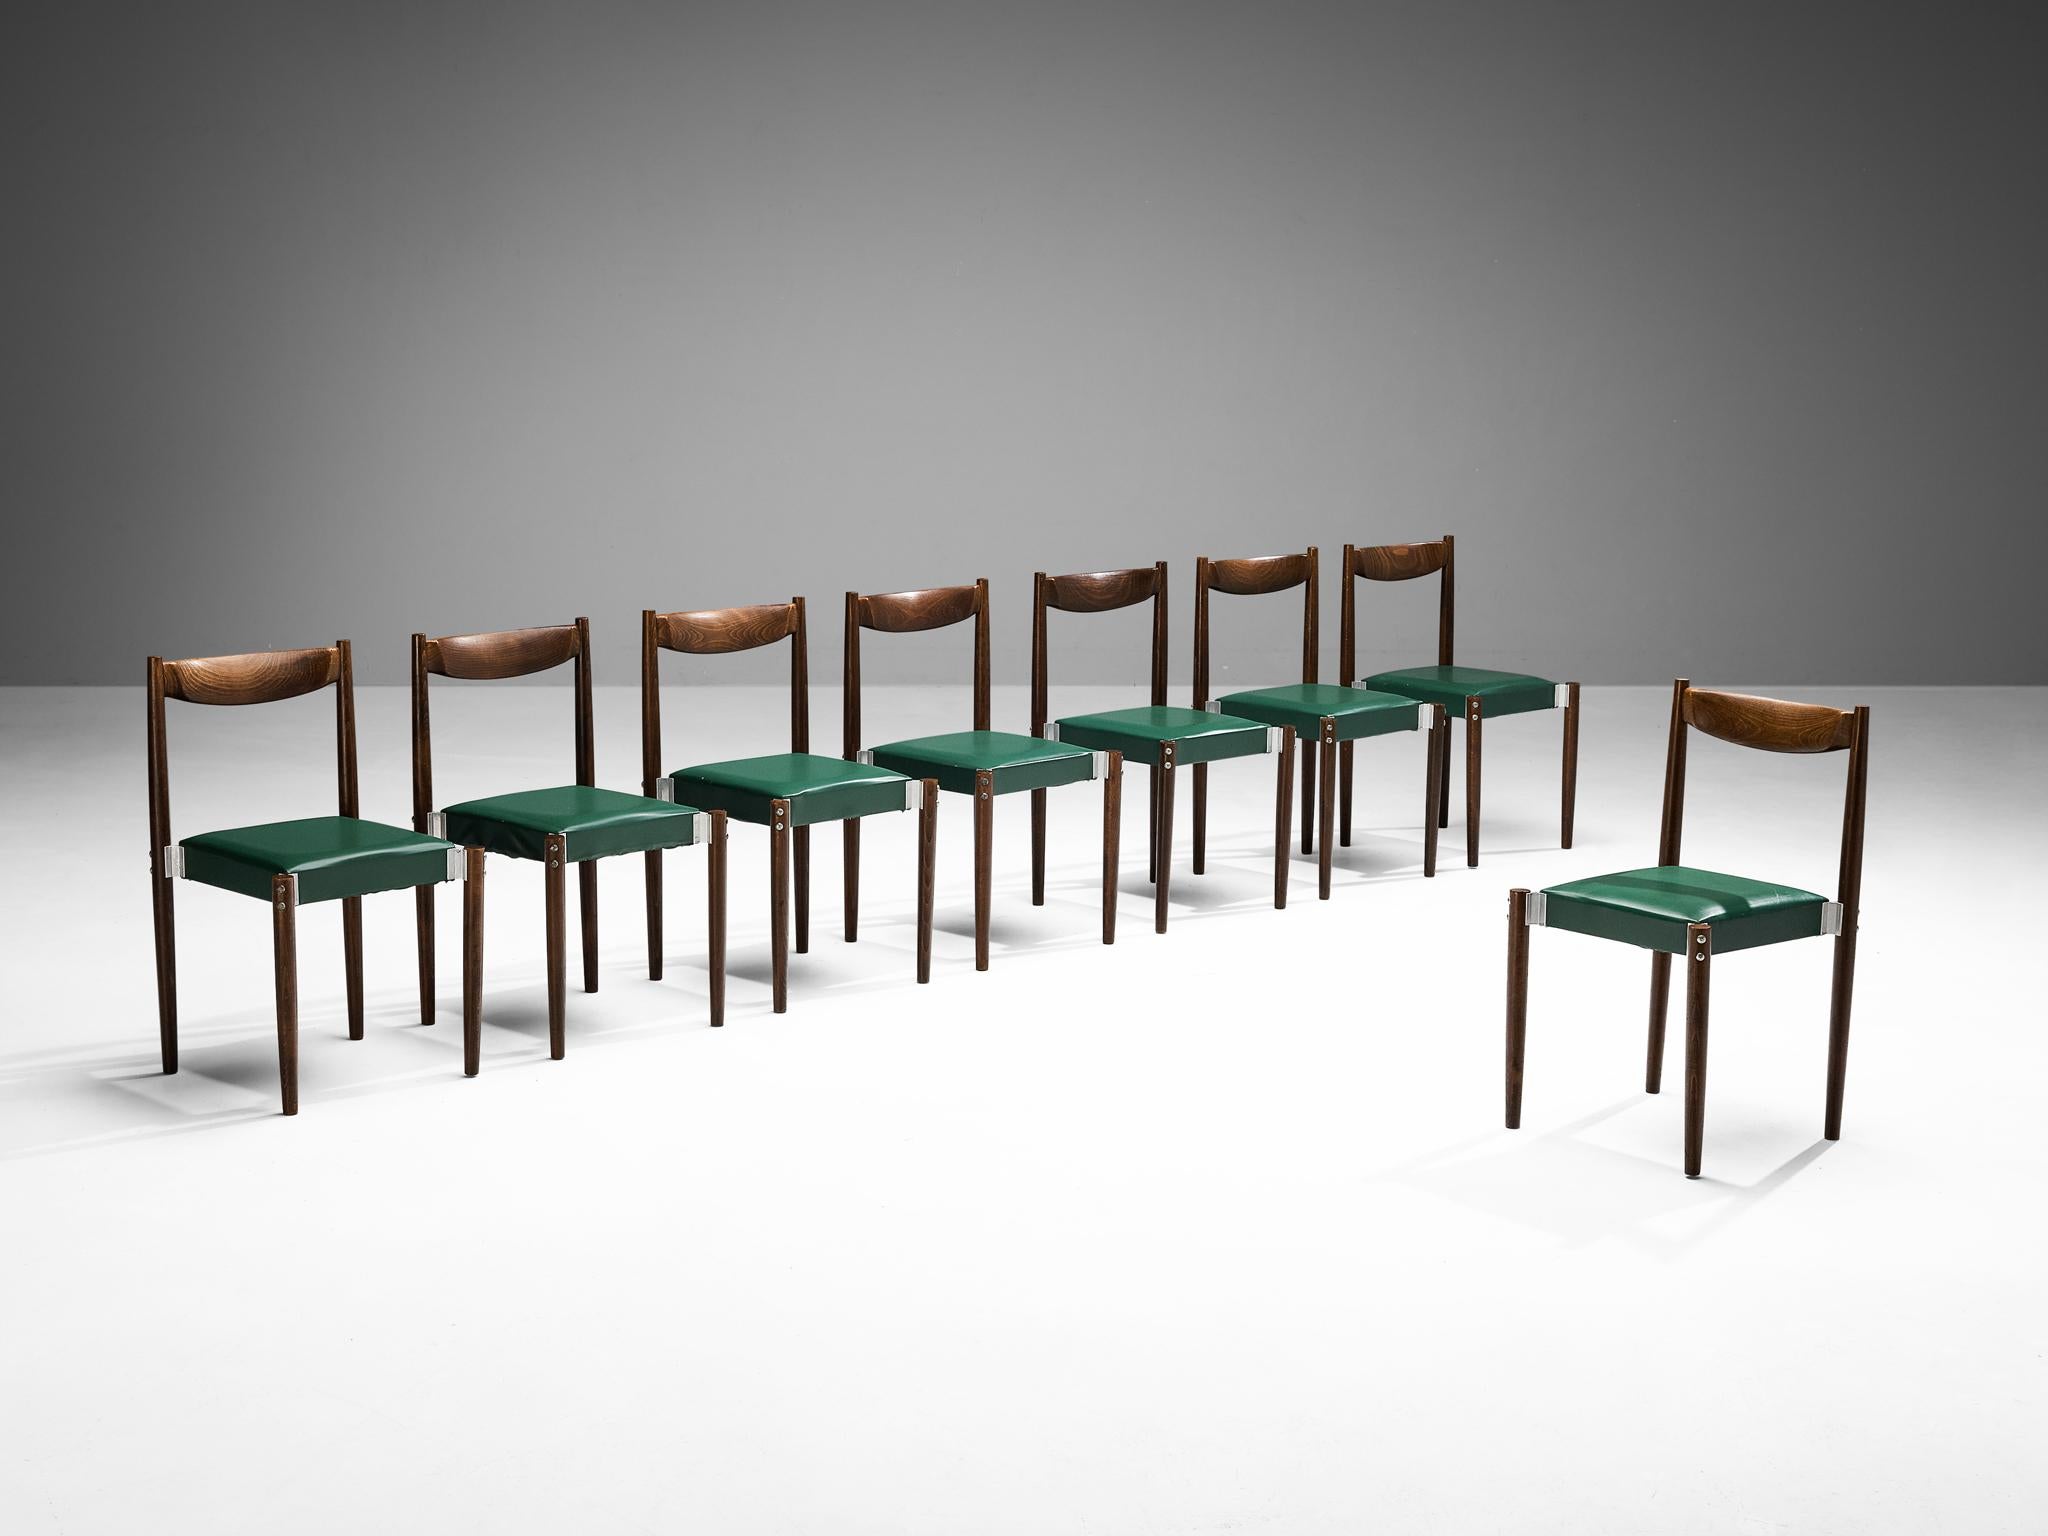 Set of eight dining chairs, leatherette, stained beech, aluminum, Czech Republic, 1960s.

Well-proportioned set of dining chairs with constructive detailing discernible in the aluminum joints that connect the legs with the seat. The wooden frame is